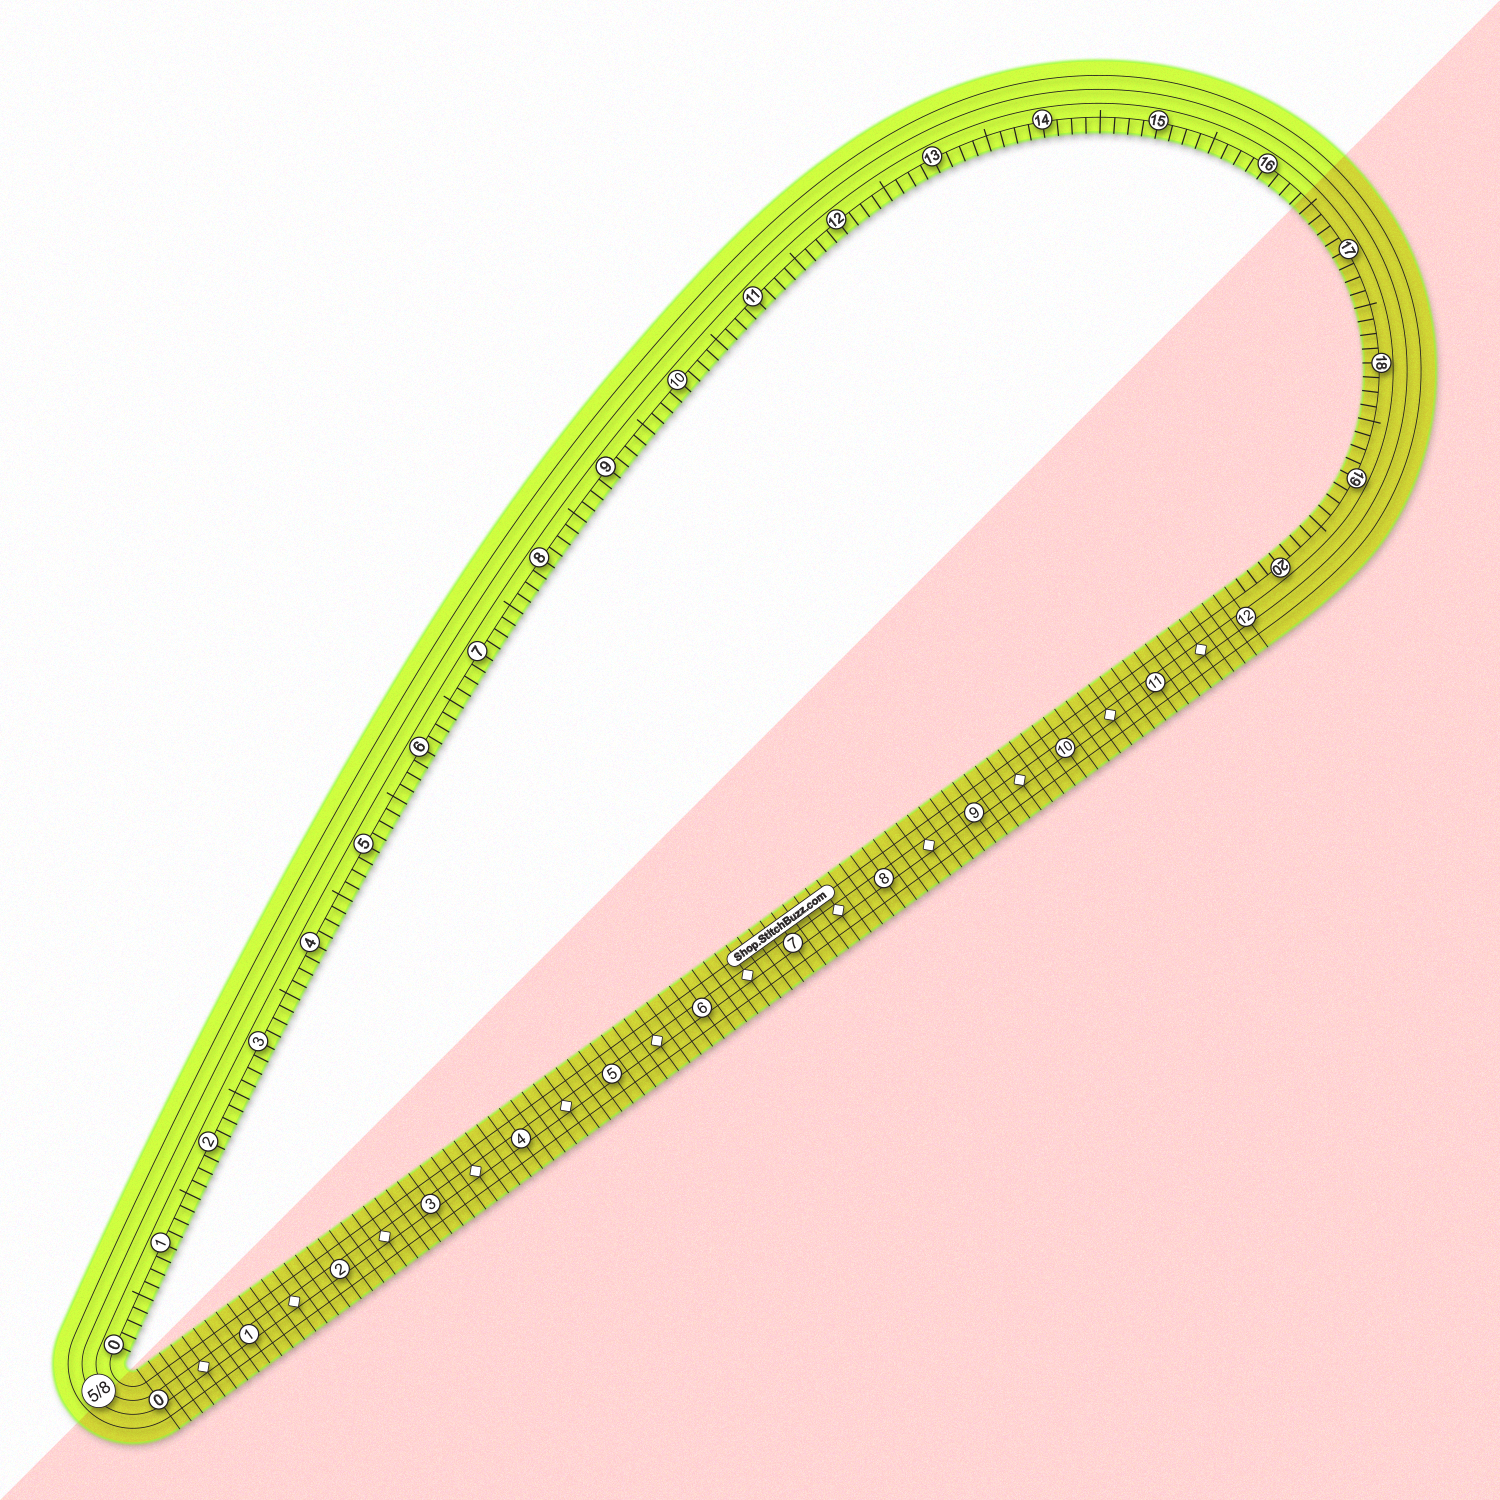 see-through green french curve ruler five eighths inch seam allowance